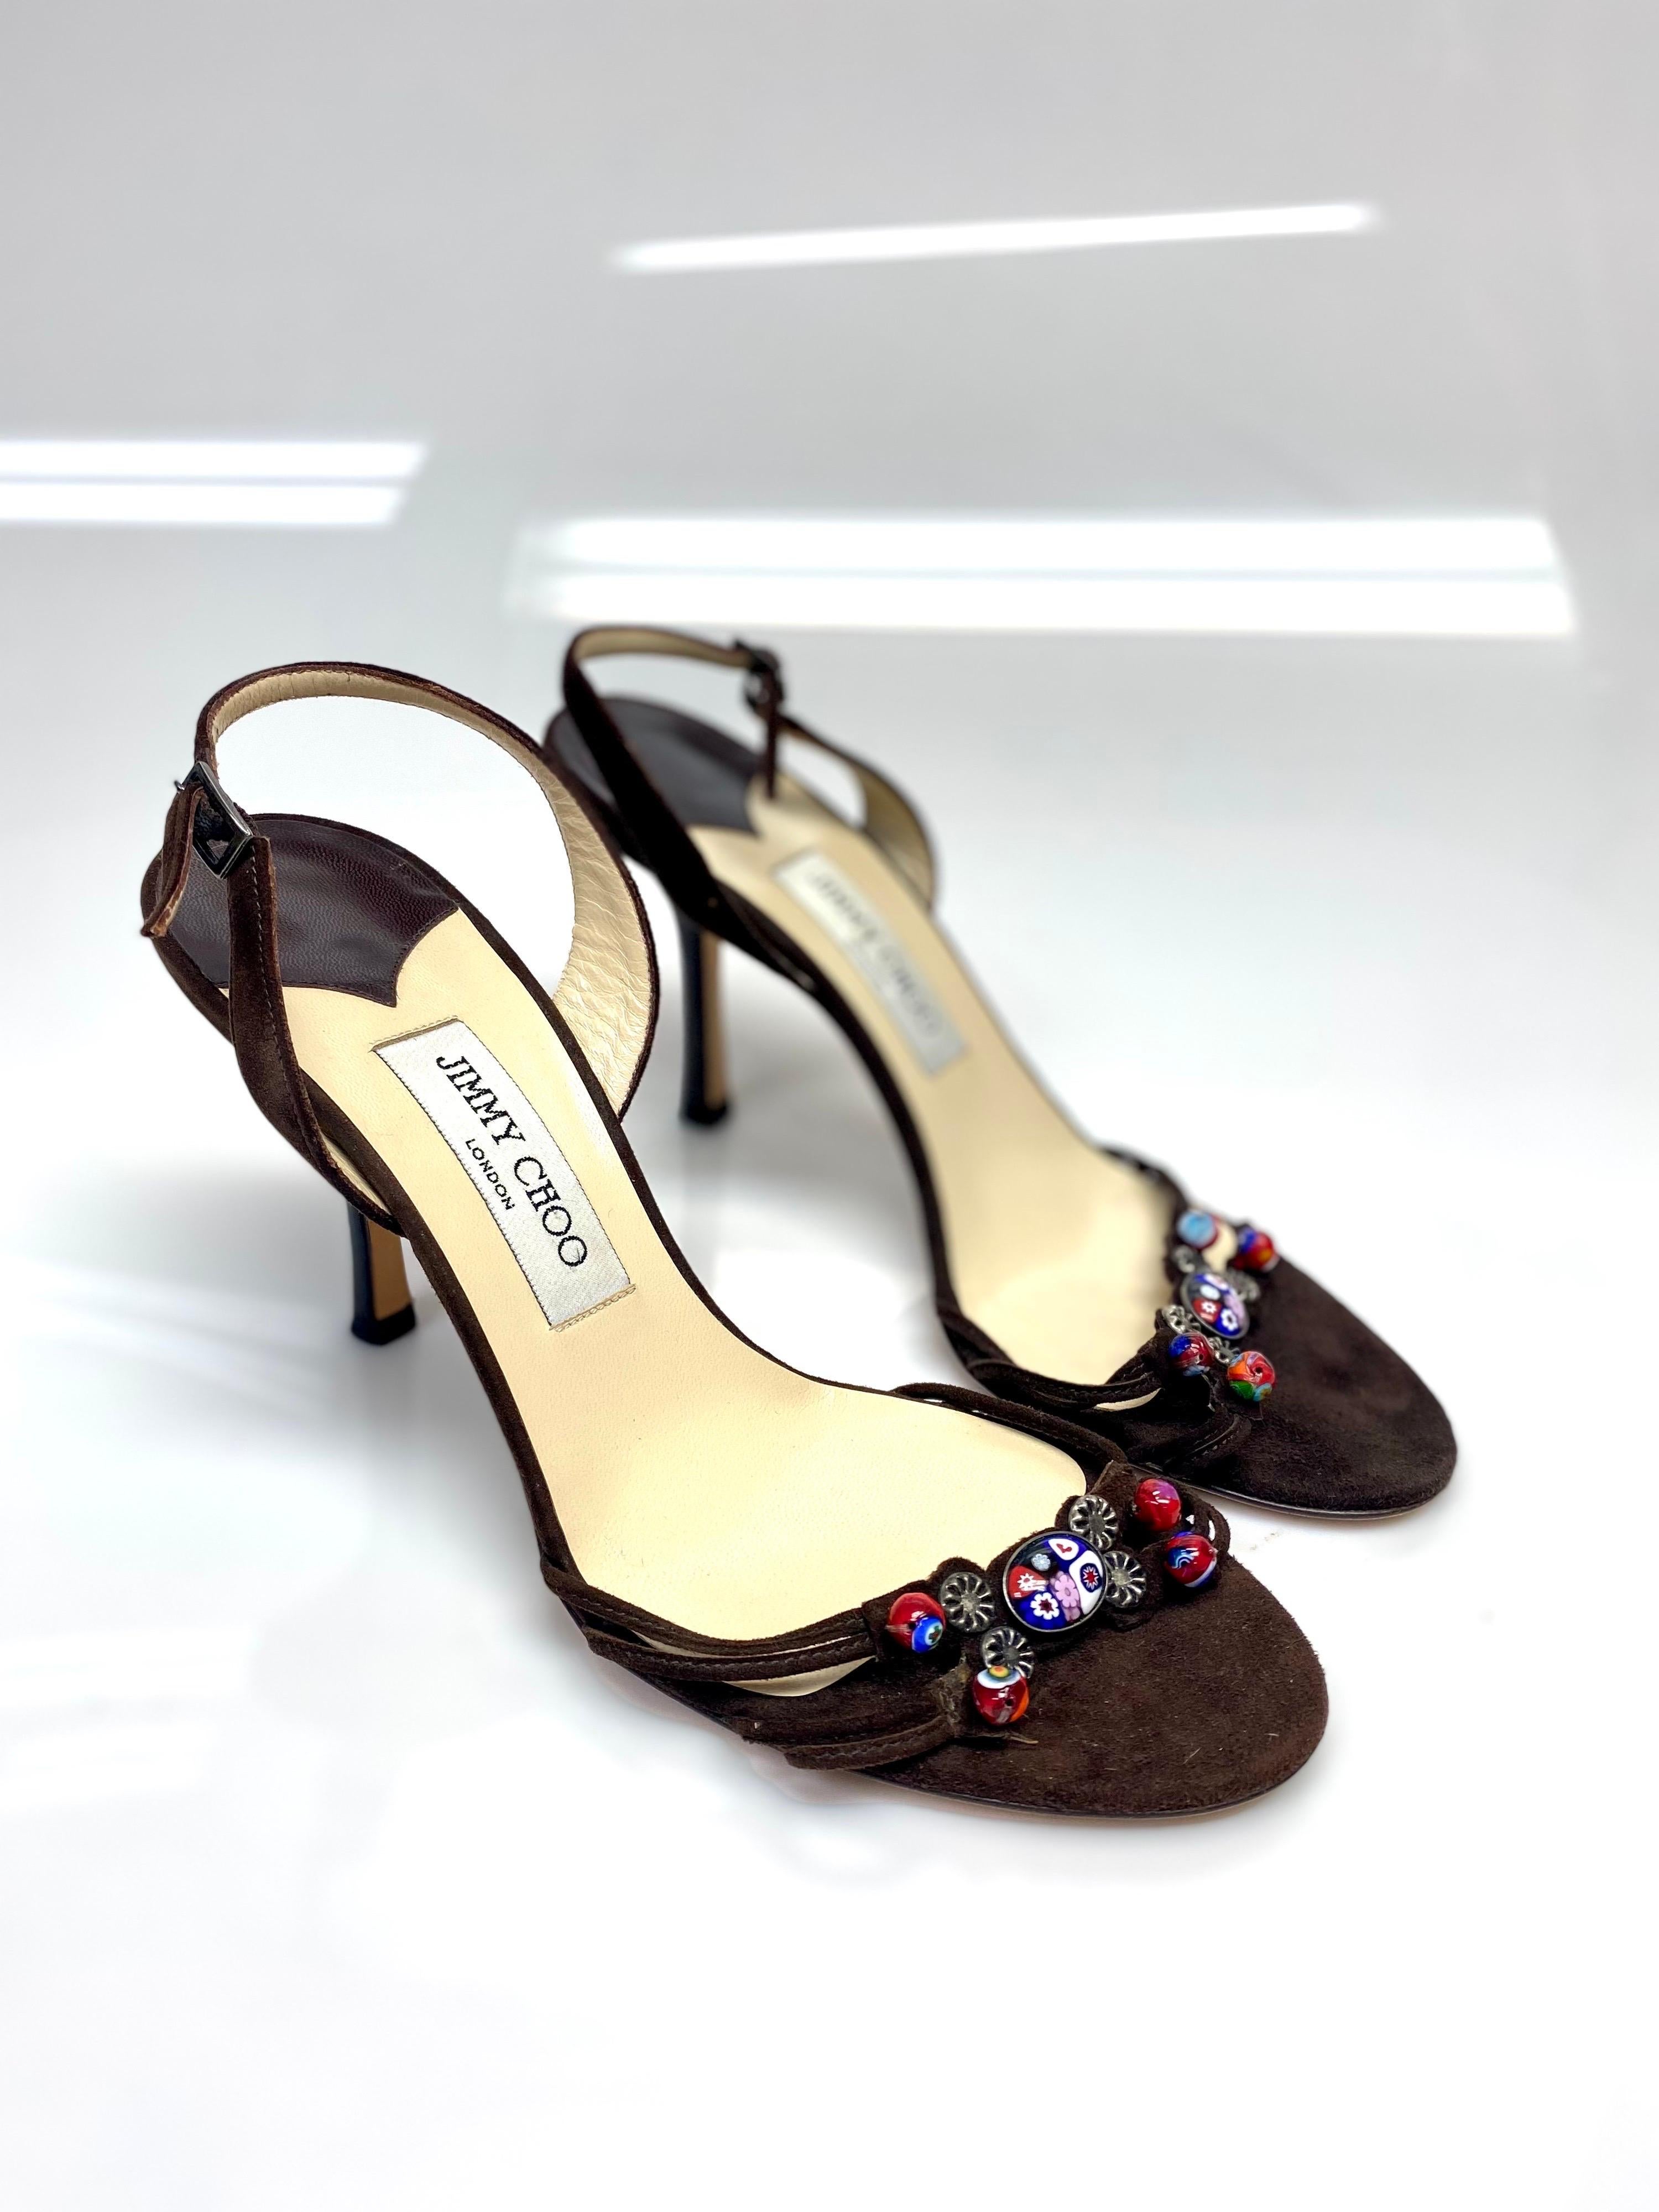 Jimmy Choo Brown Suede Slingback Sandal with Beaded Detailing Size 39. These Jimmy Choo suede slingback sandals celebrate the brand's expert attention to detail. The shoe features chocolate brown suede and beads adorning the front of the shoe. Item